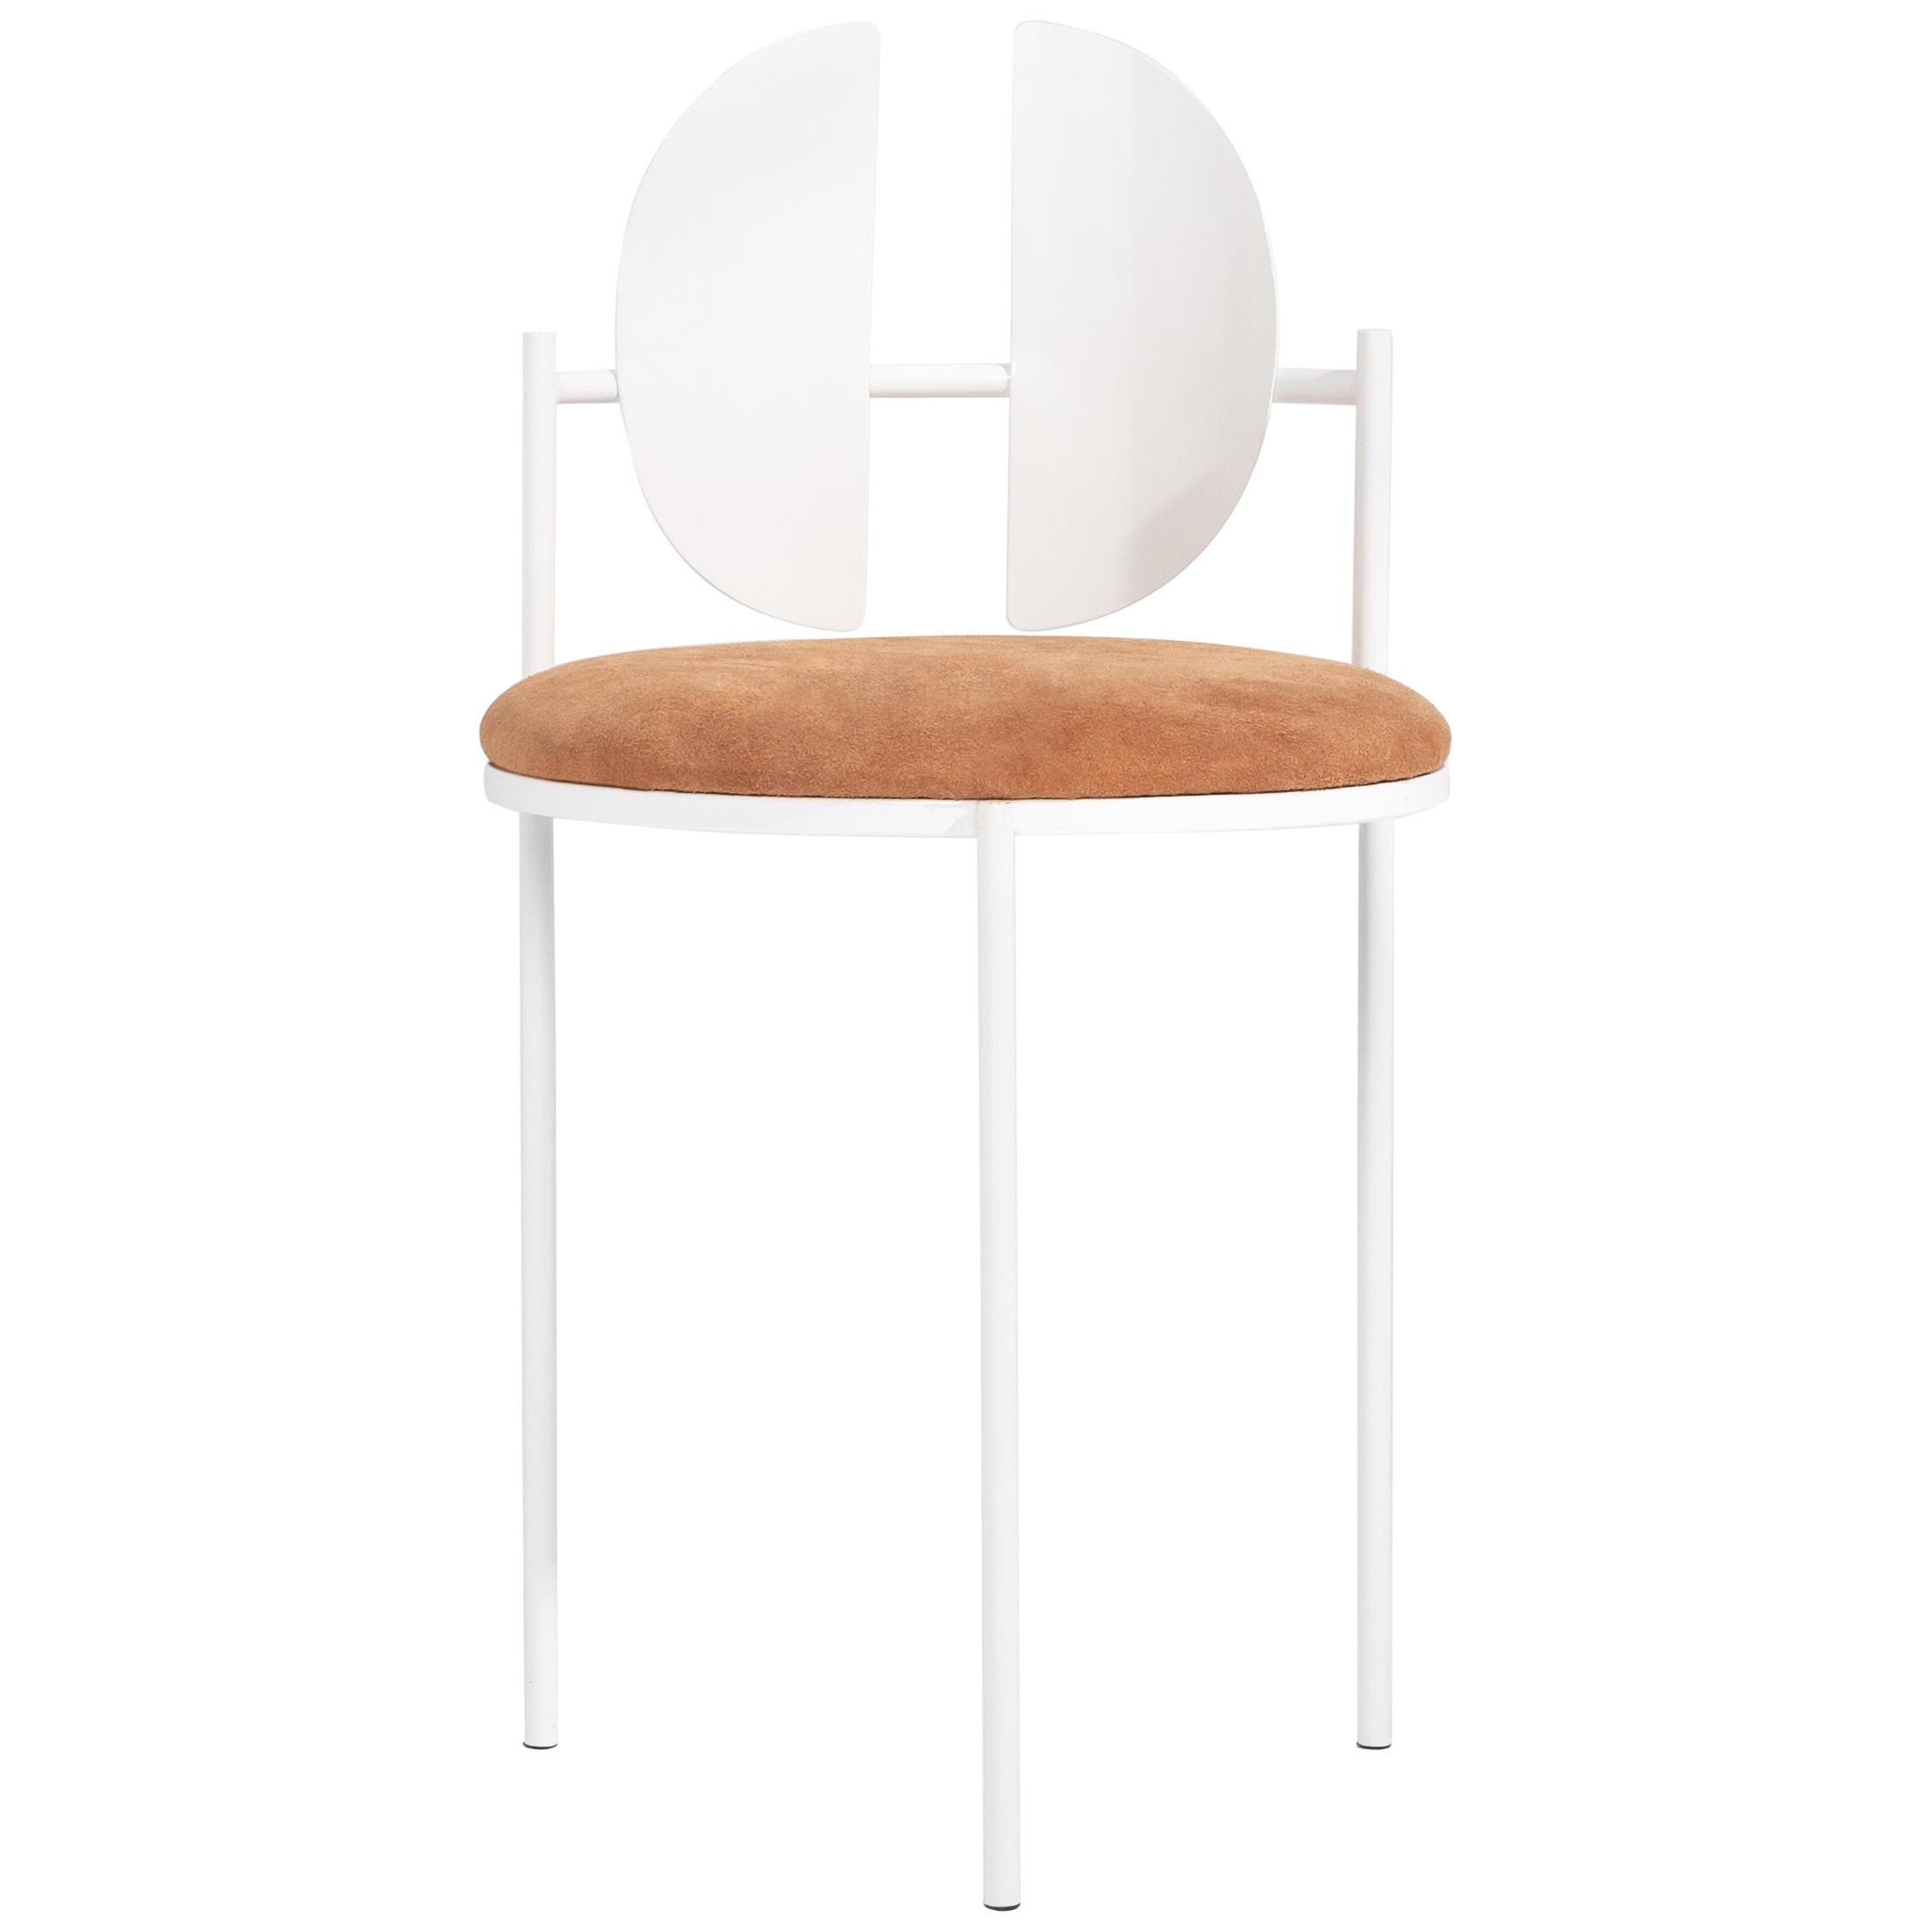 Qoticher Chair by Ángel Mombiedro For Sale